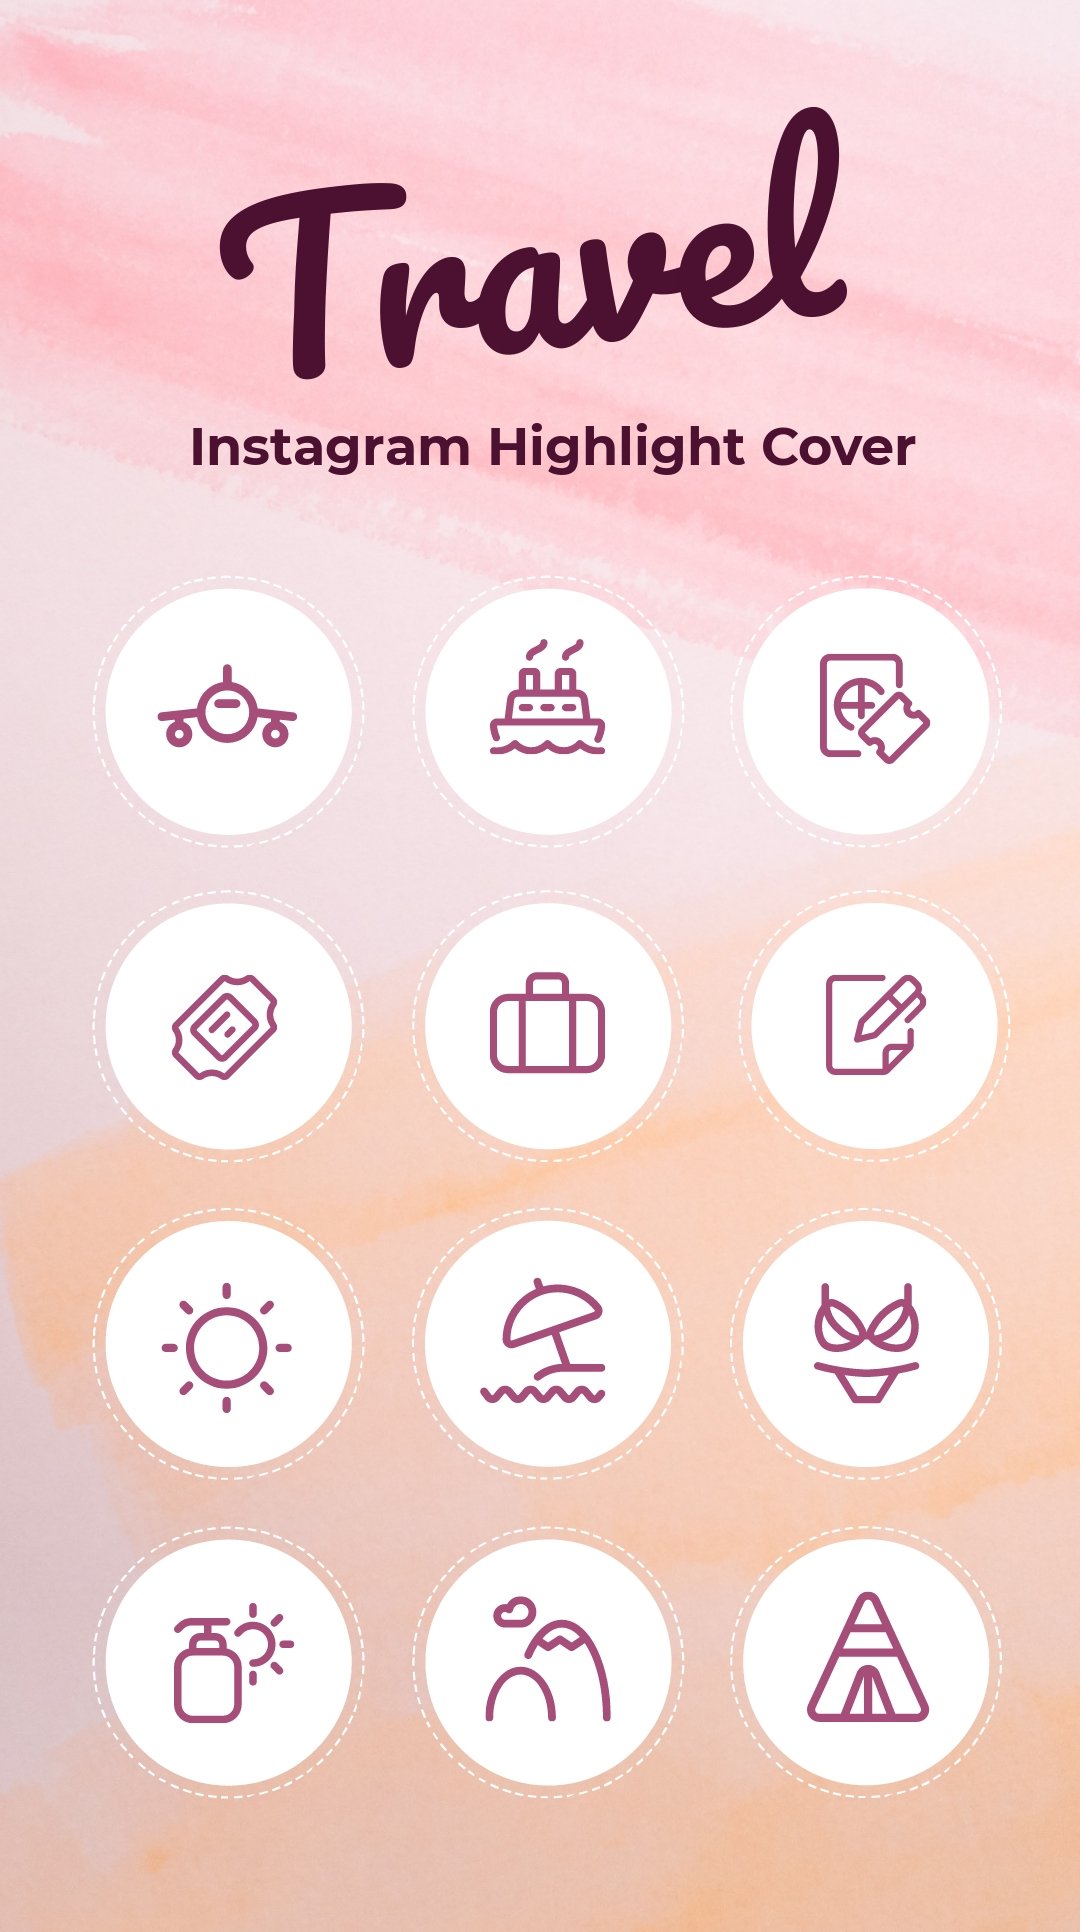 how to make cover instagram highlight